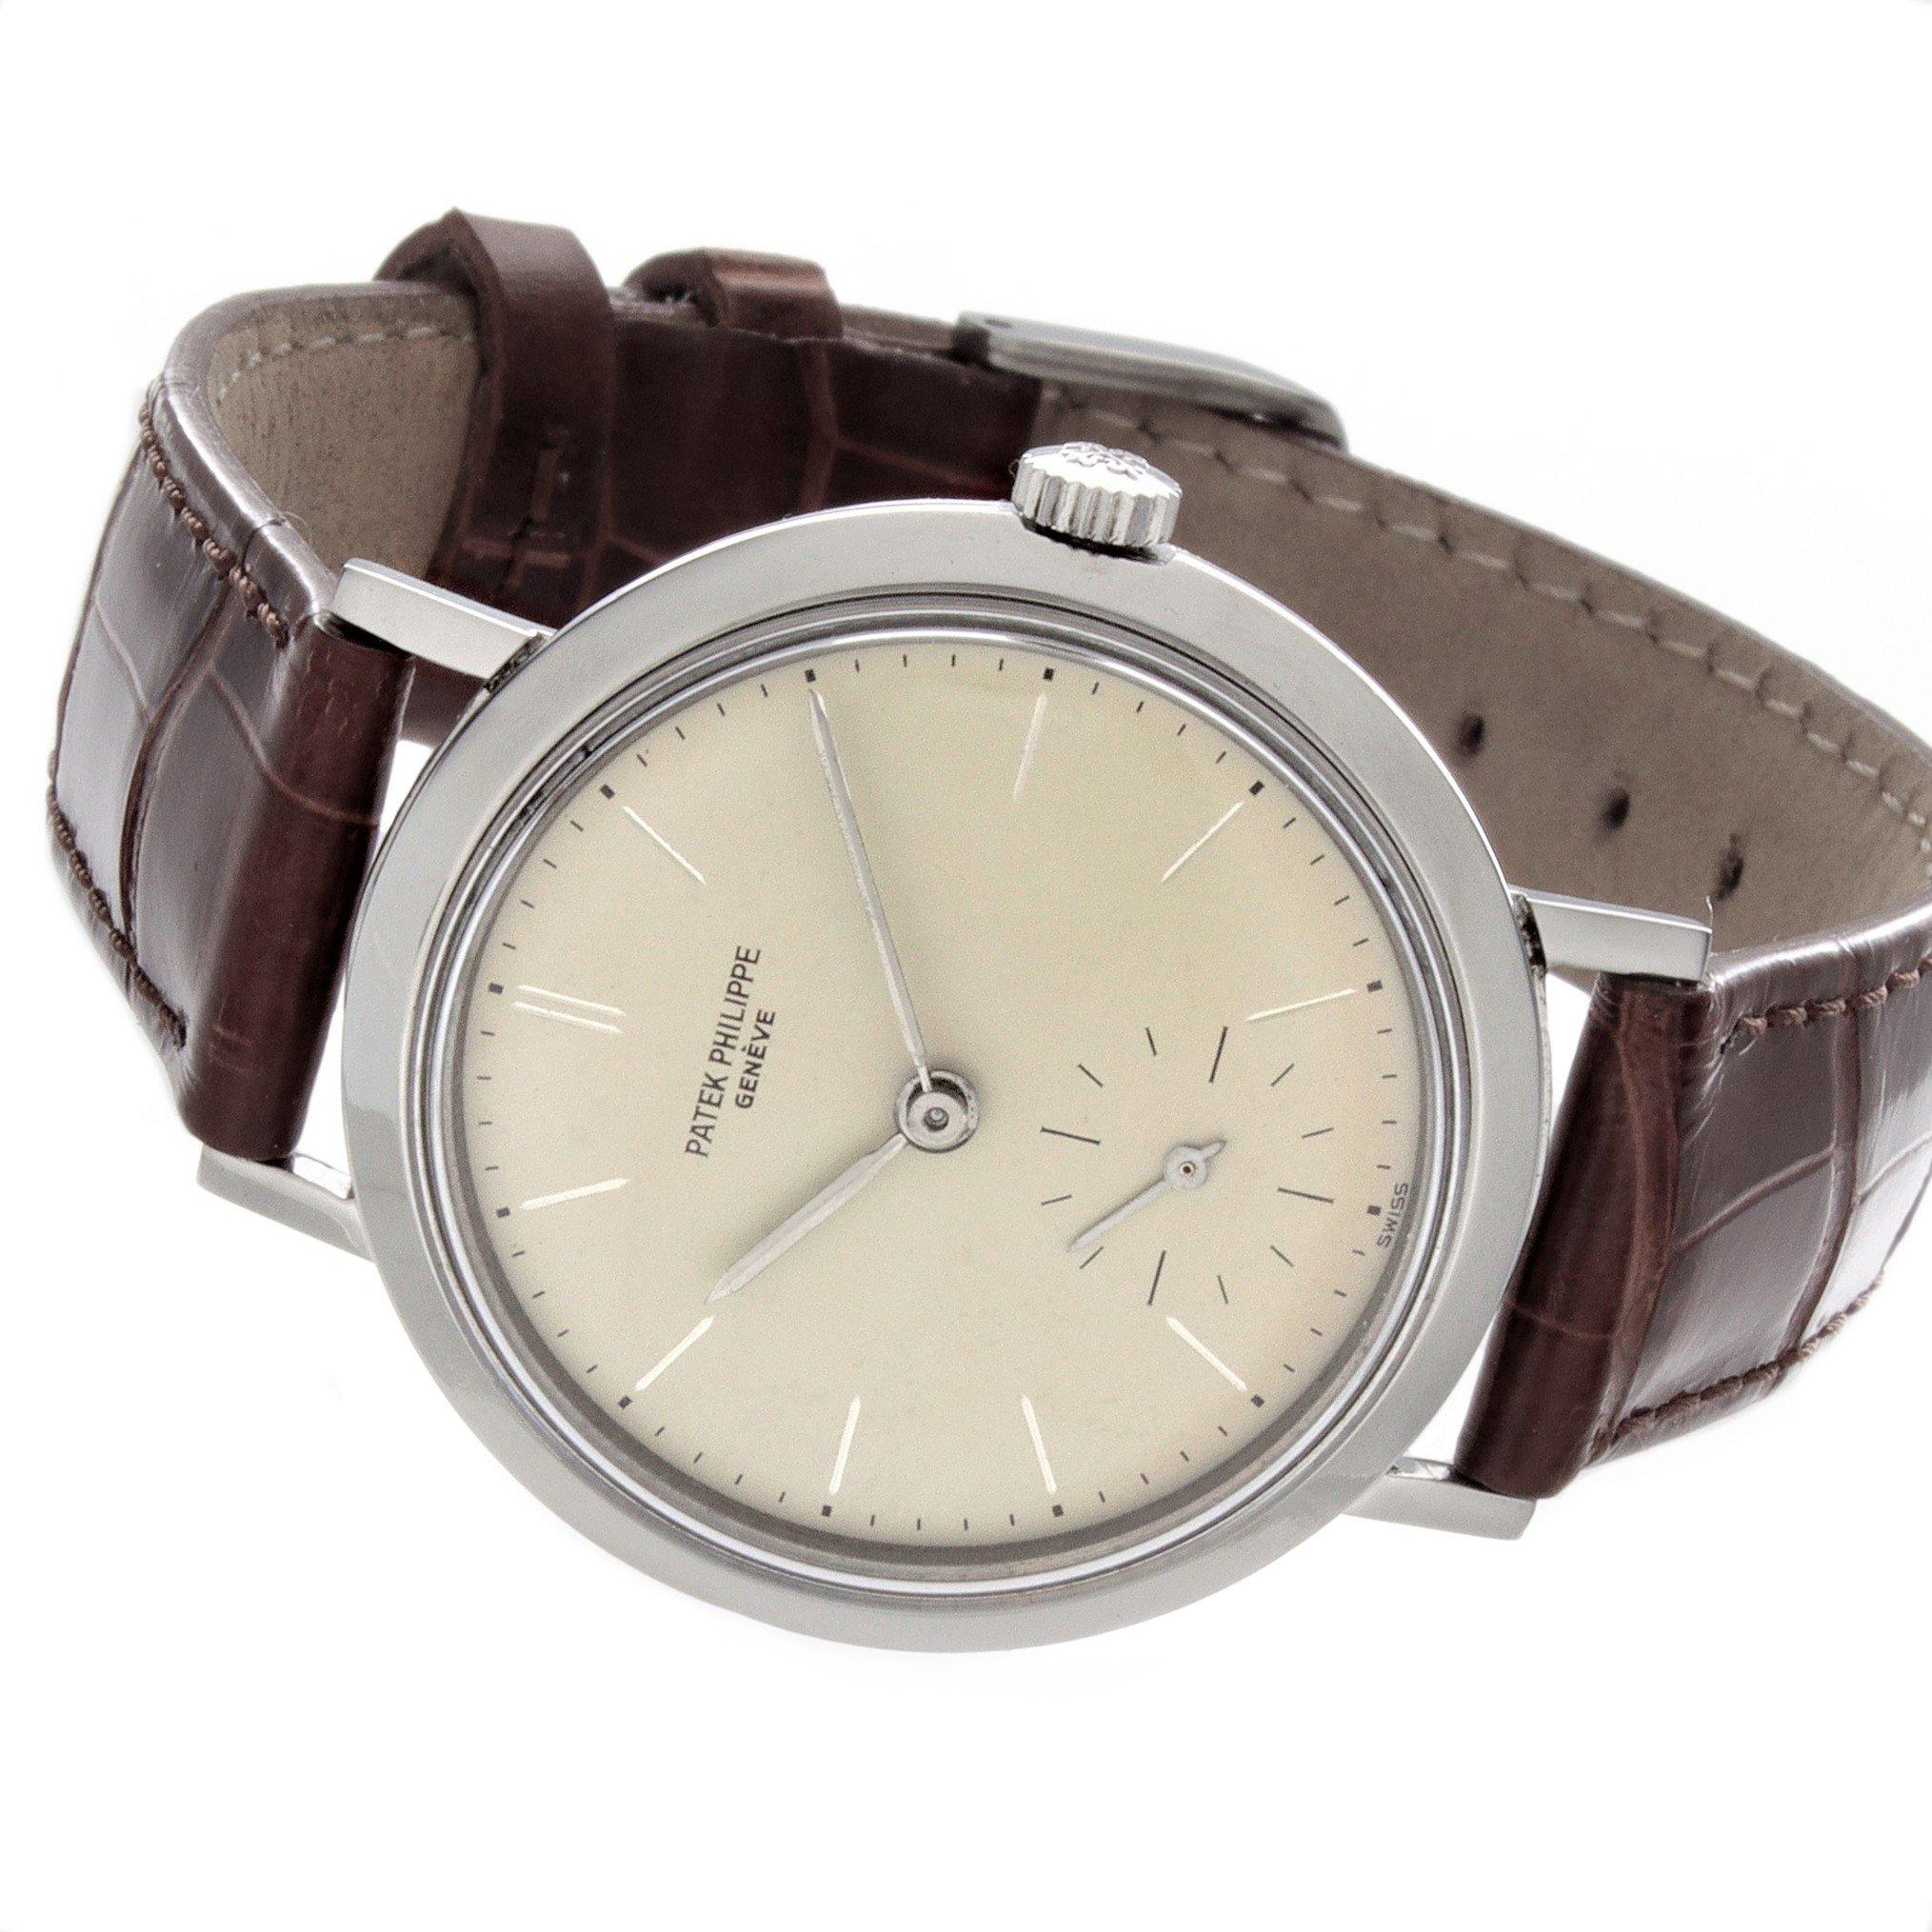 Patek Philippe 3419A Stainless Steel Calatrava Watch For Sale 3